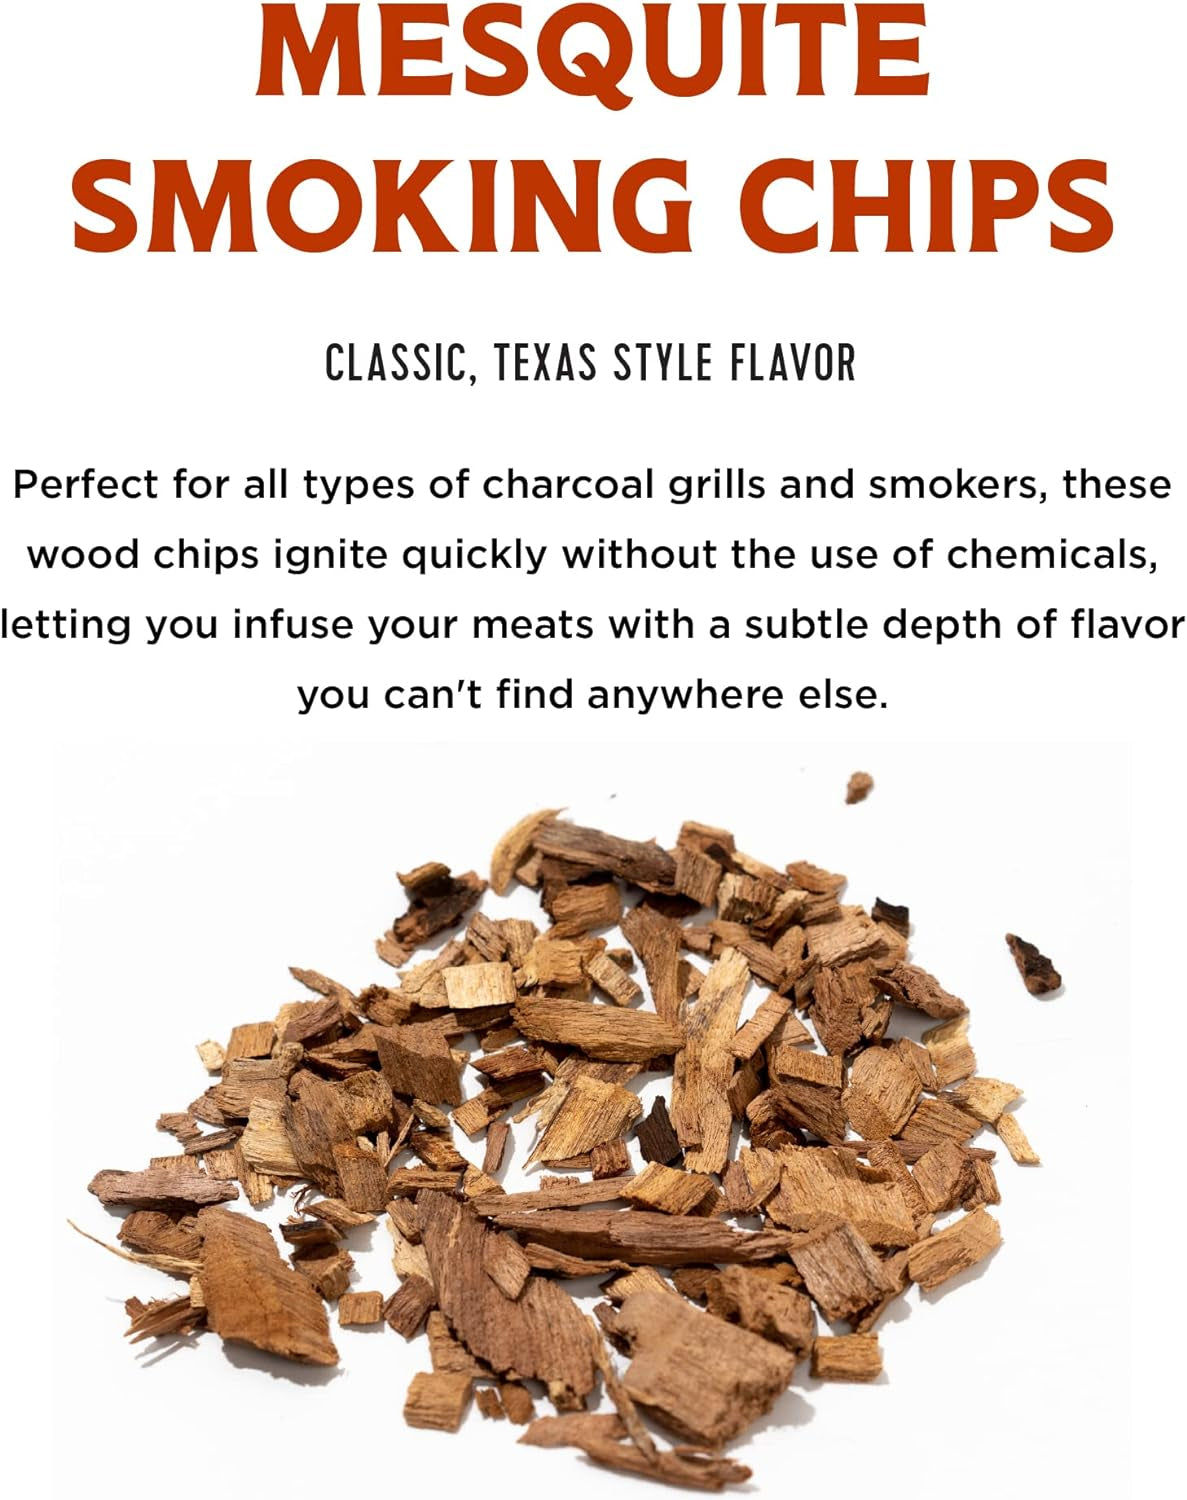 Premium All Natural Wood Chips for Smoker - Wood Chips for Smoking - Smoker Wood Chips - Smoker Accessories Gifts for Men and Women - Mesquite - 2Lbs